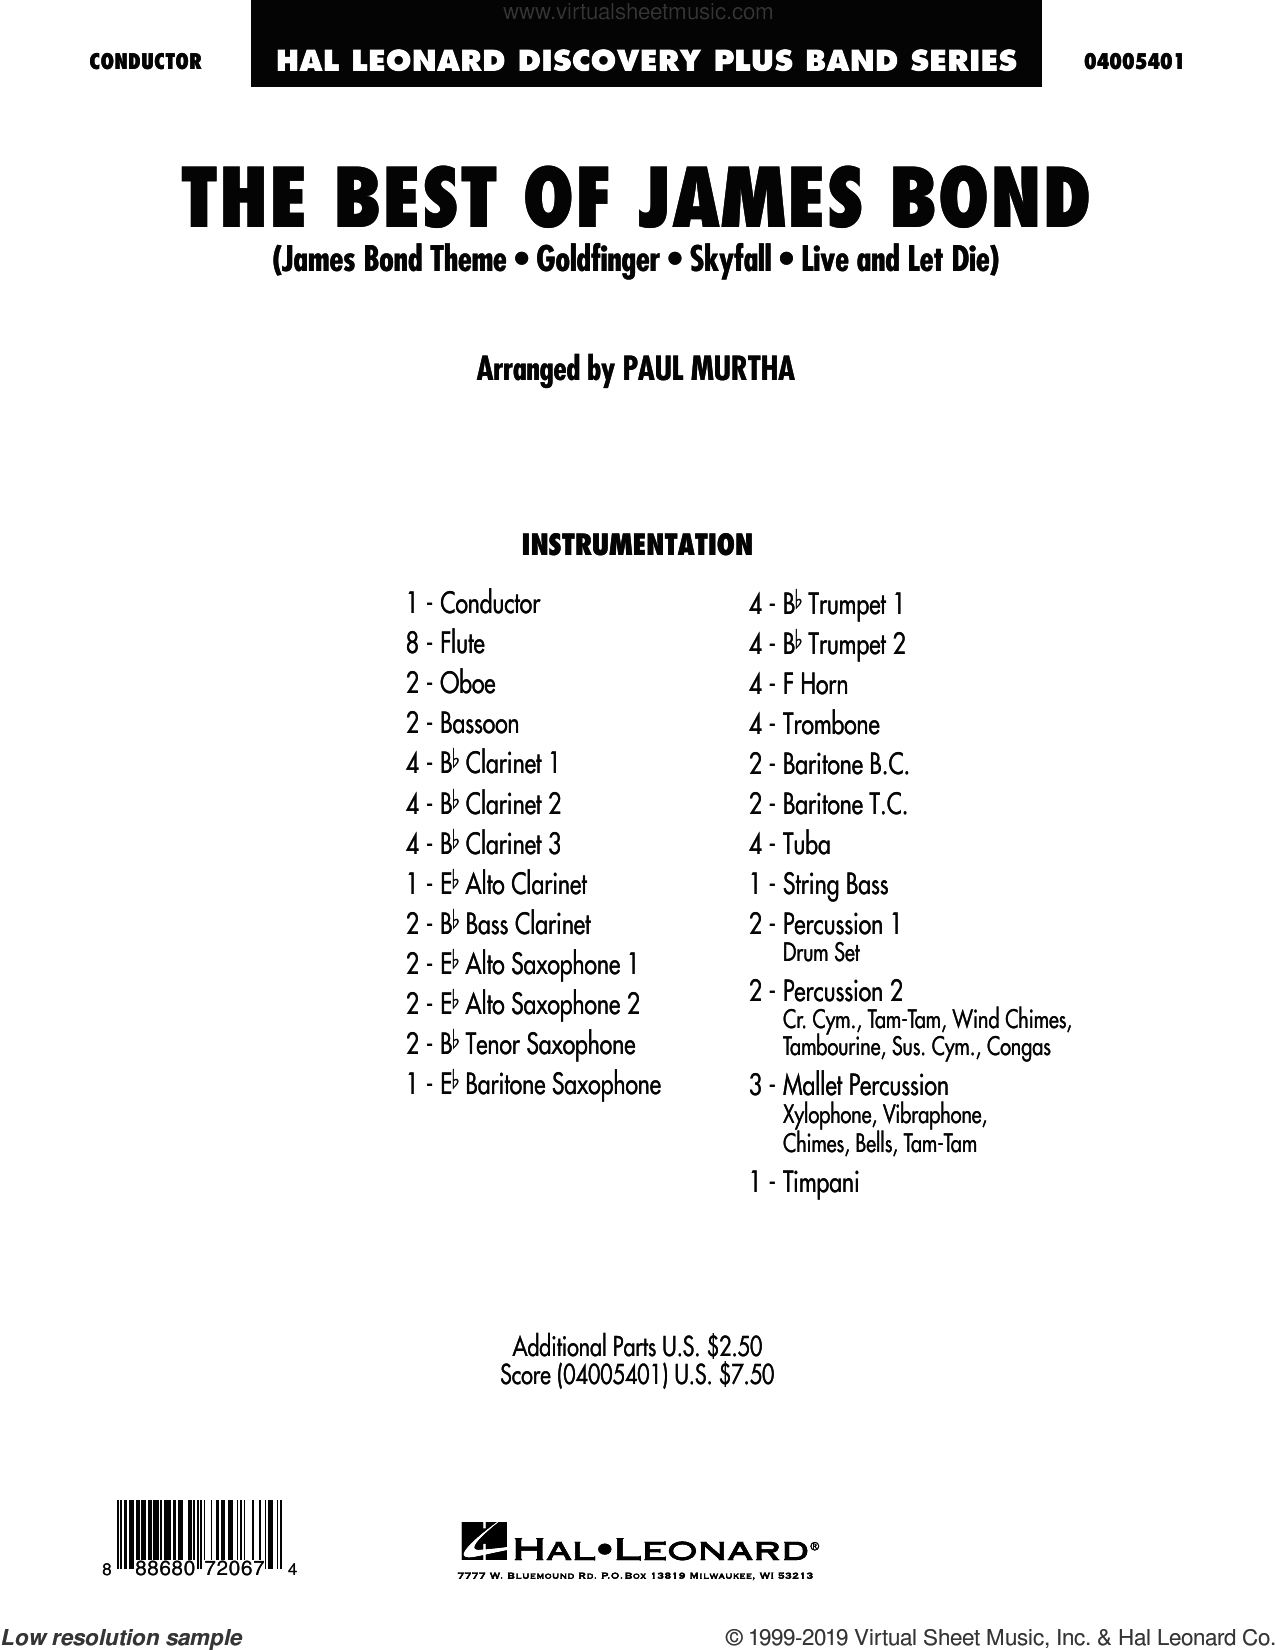 The Best of James Bond sheet music collection) for concert band